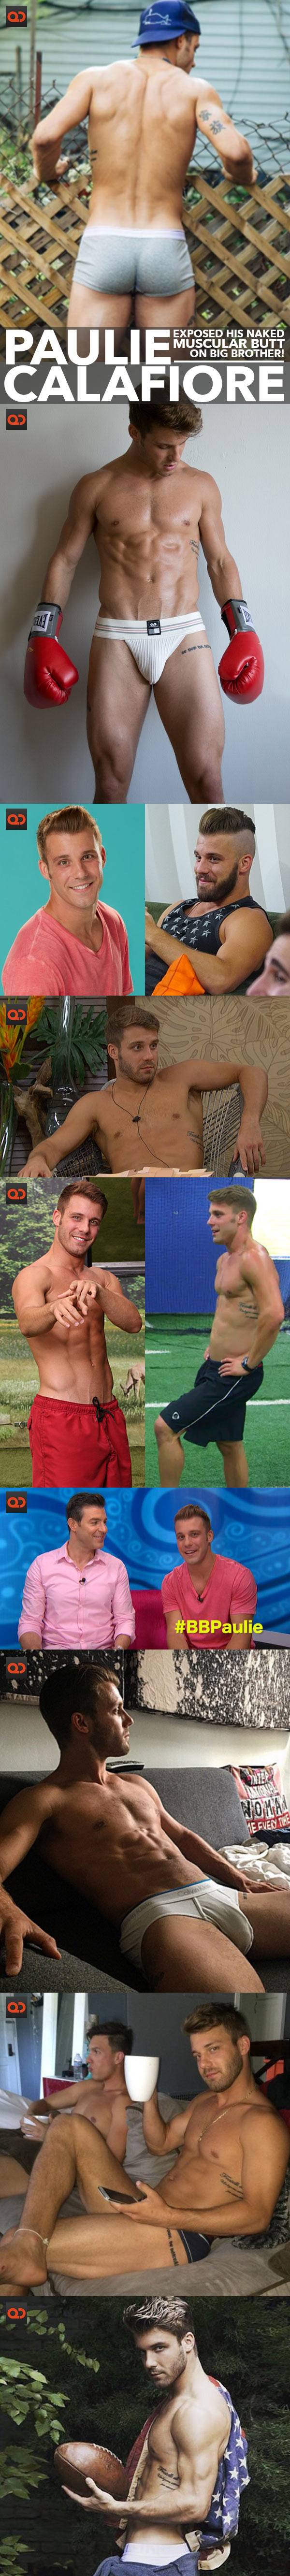 Paulie Calafiore Exposed His Naked Muscular Butt On Big Brother!